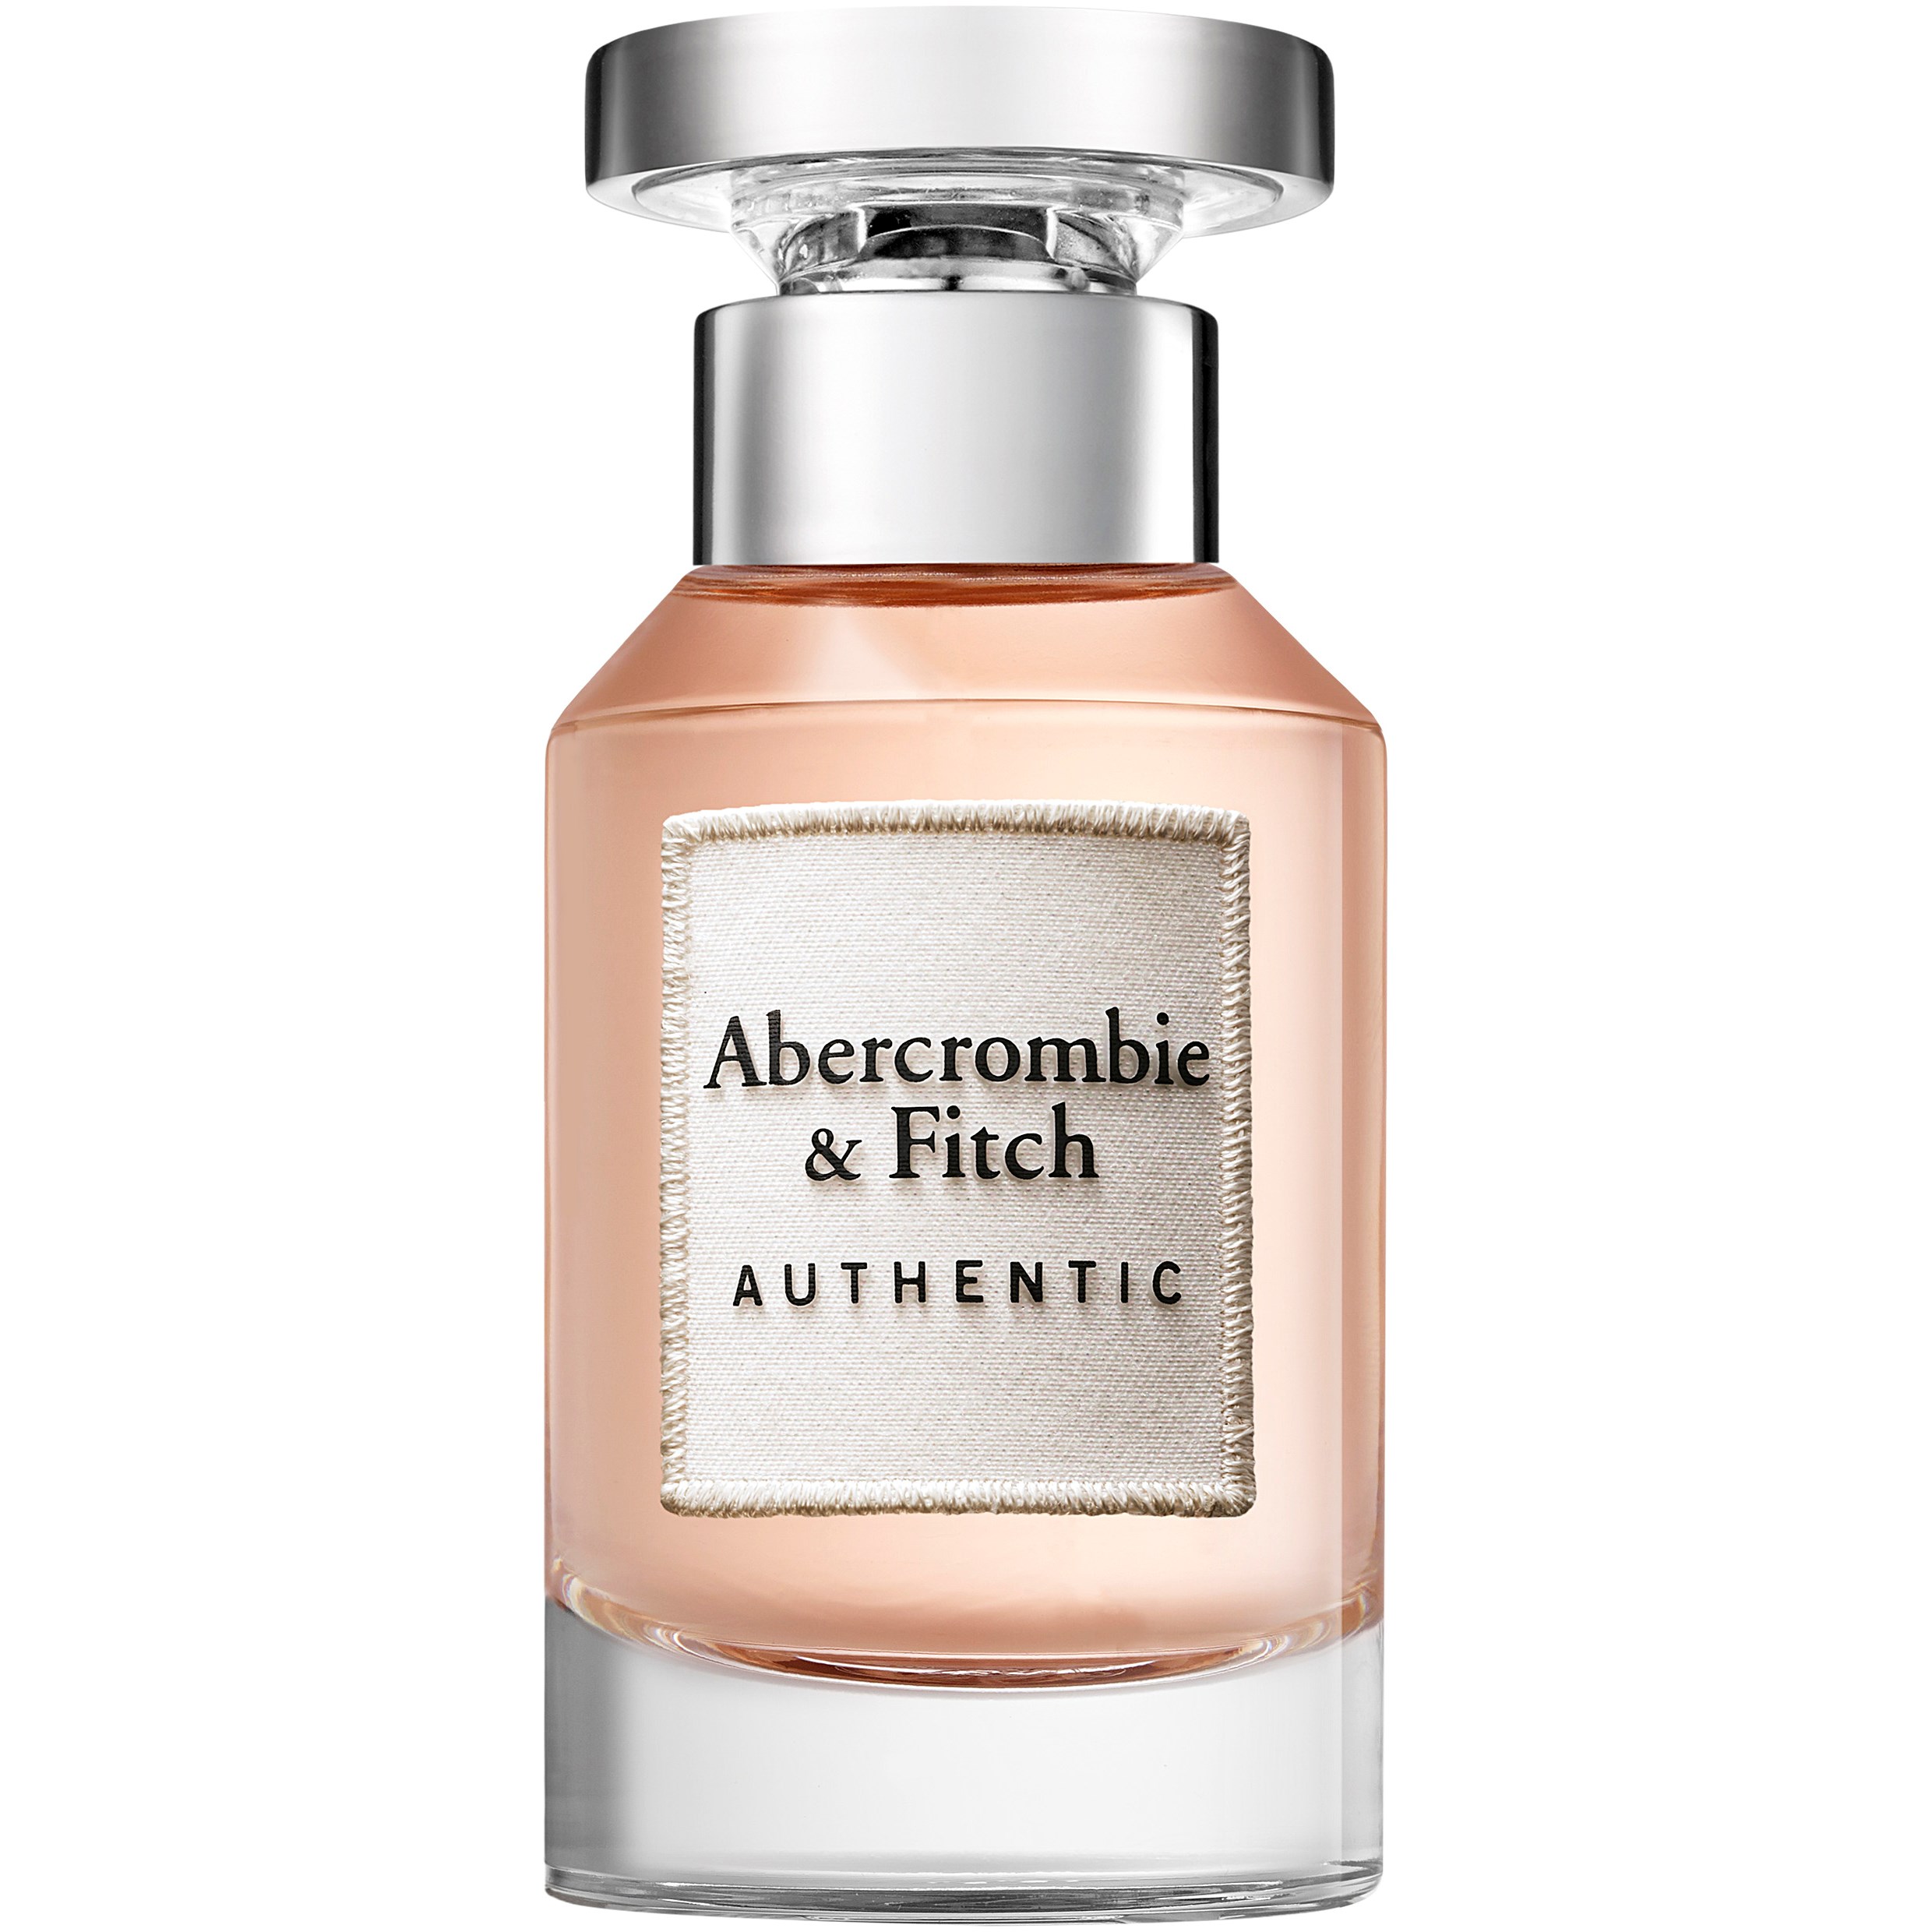 Abercrombie & Fitch Authentic Woman Edp 50ml